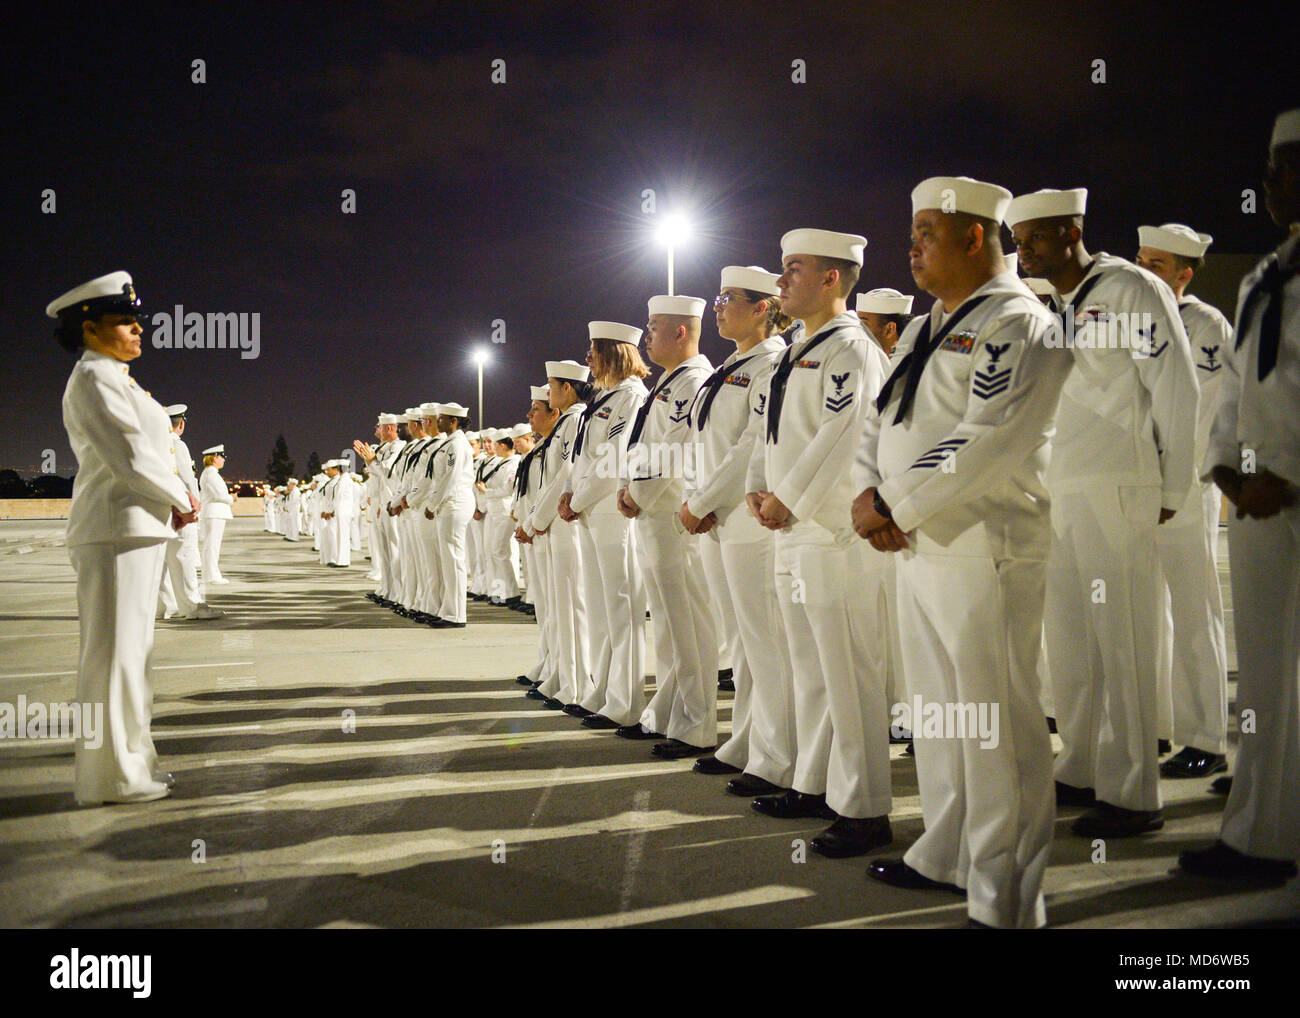 180316-N-PN275-1007 SAN DIEGO (Mar. 16, 2018)  Sailors from Naval Medical Center San Diego”s (NMCSD) Directorate for Administration (DFA) stand in formation during a dress whites inspection. DFA is committed to providing quality, timely, innovative and economical healthcare administration to staff and patients of NMCSD. (U.S. Navy Photo by Mass Communication Specialist 2nd Class Zachary Kreitzer) Stock Photo